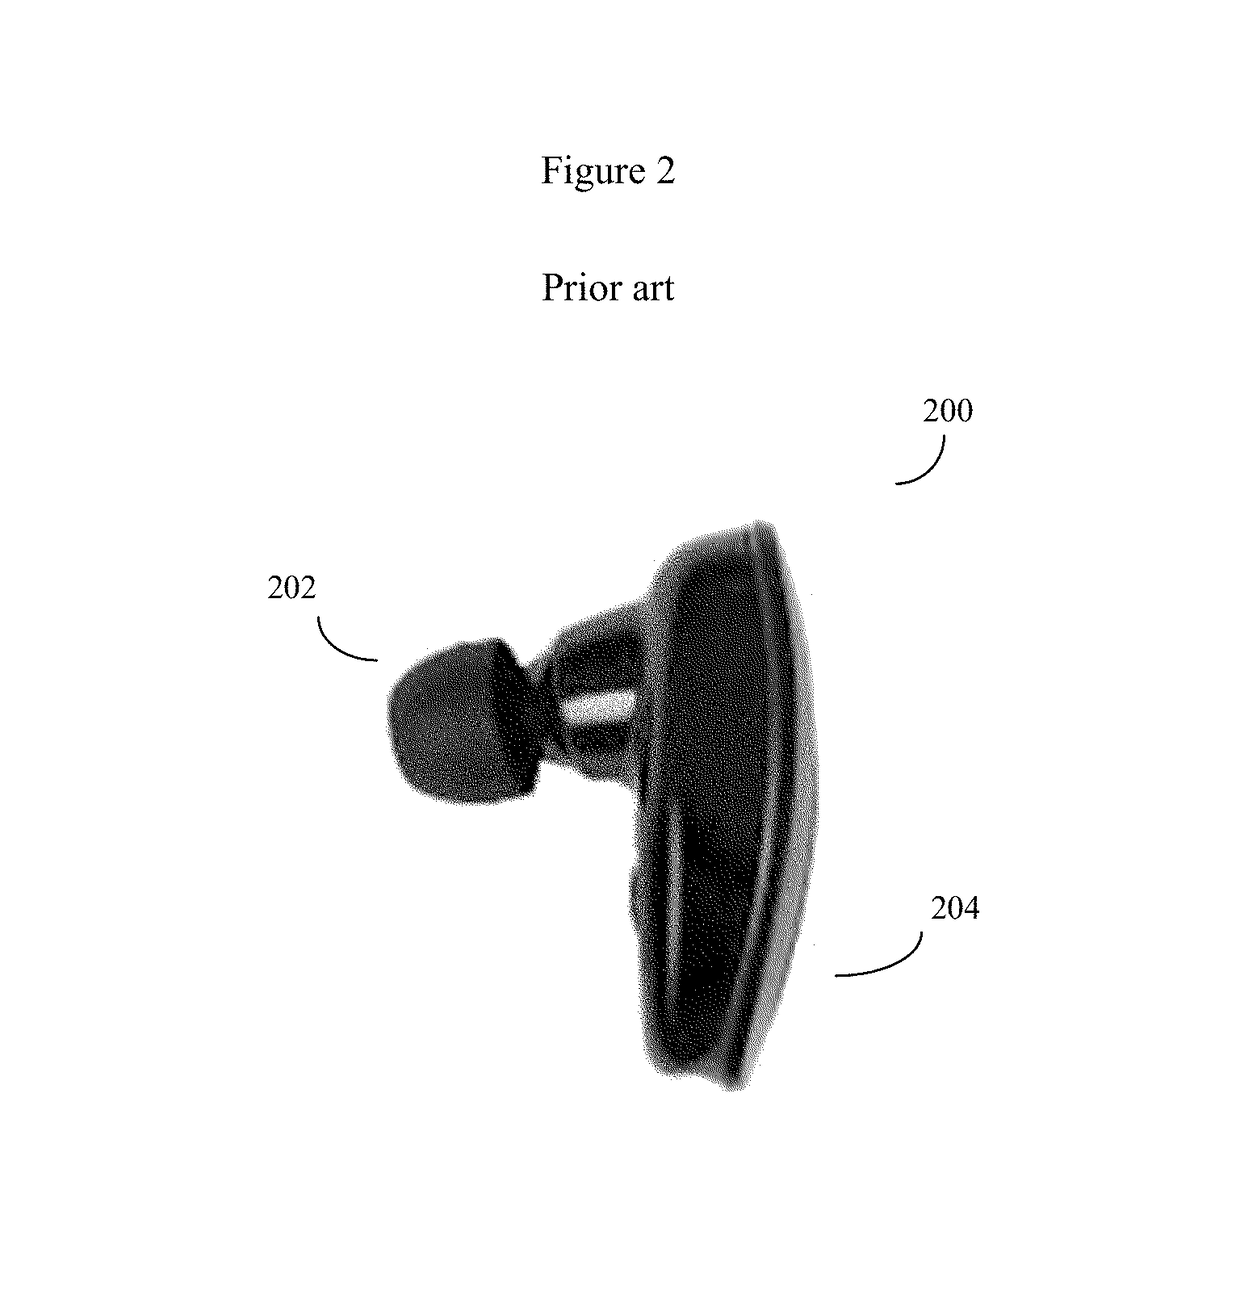 Wired wearable audio video to wireless audio video bridging device